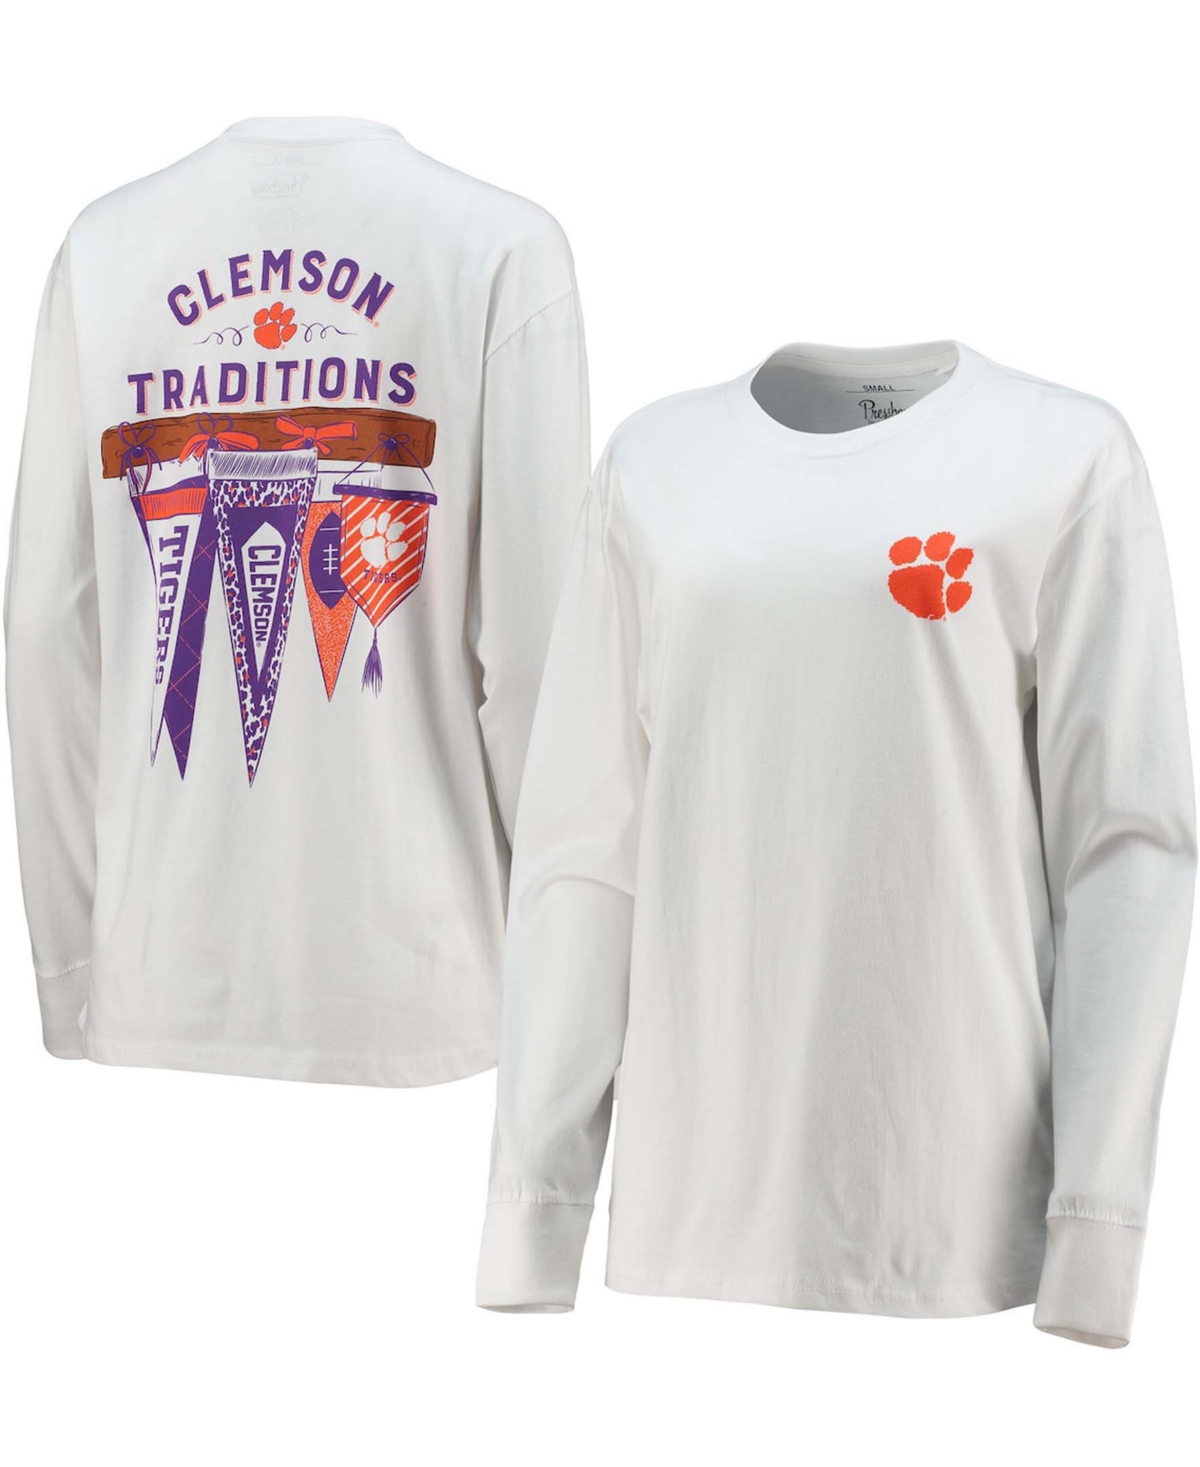 Women's White Clemson Tigers Traditions Pennant Long Sleeve T-shirt - White